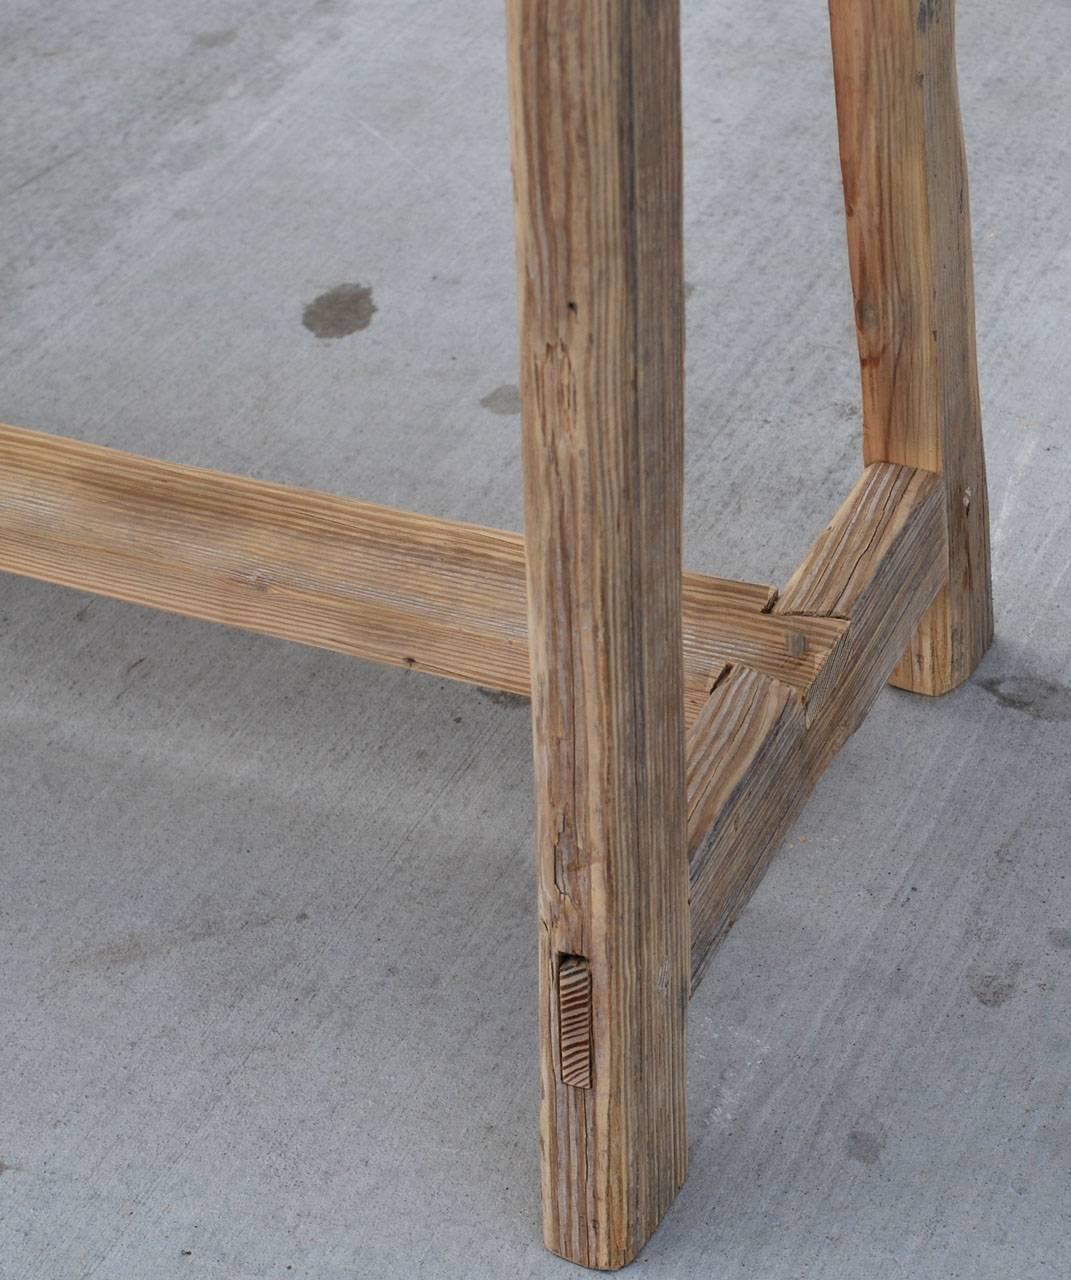 Hand-Crafted Made to Order Console Table or Work Table in Reclaimed Wood by Petersen Antiques